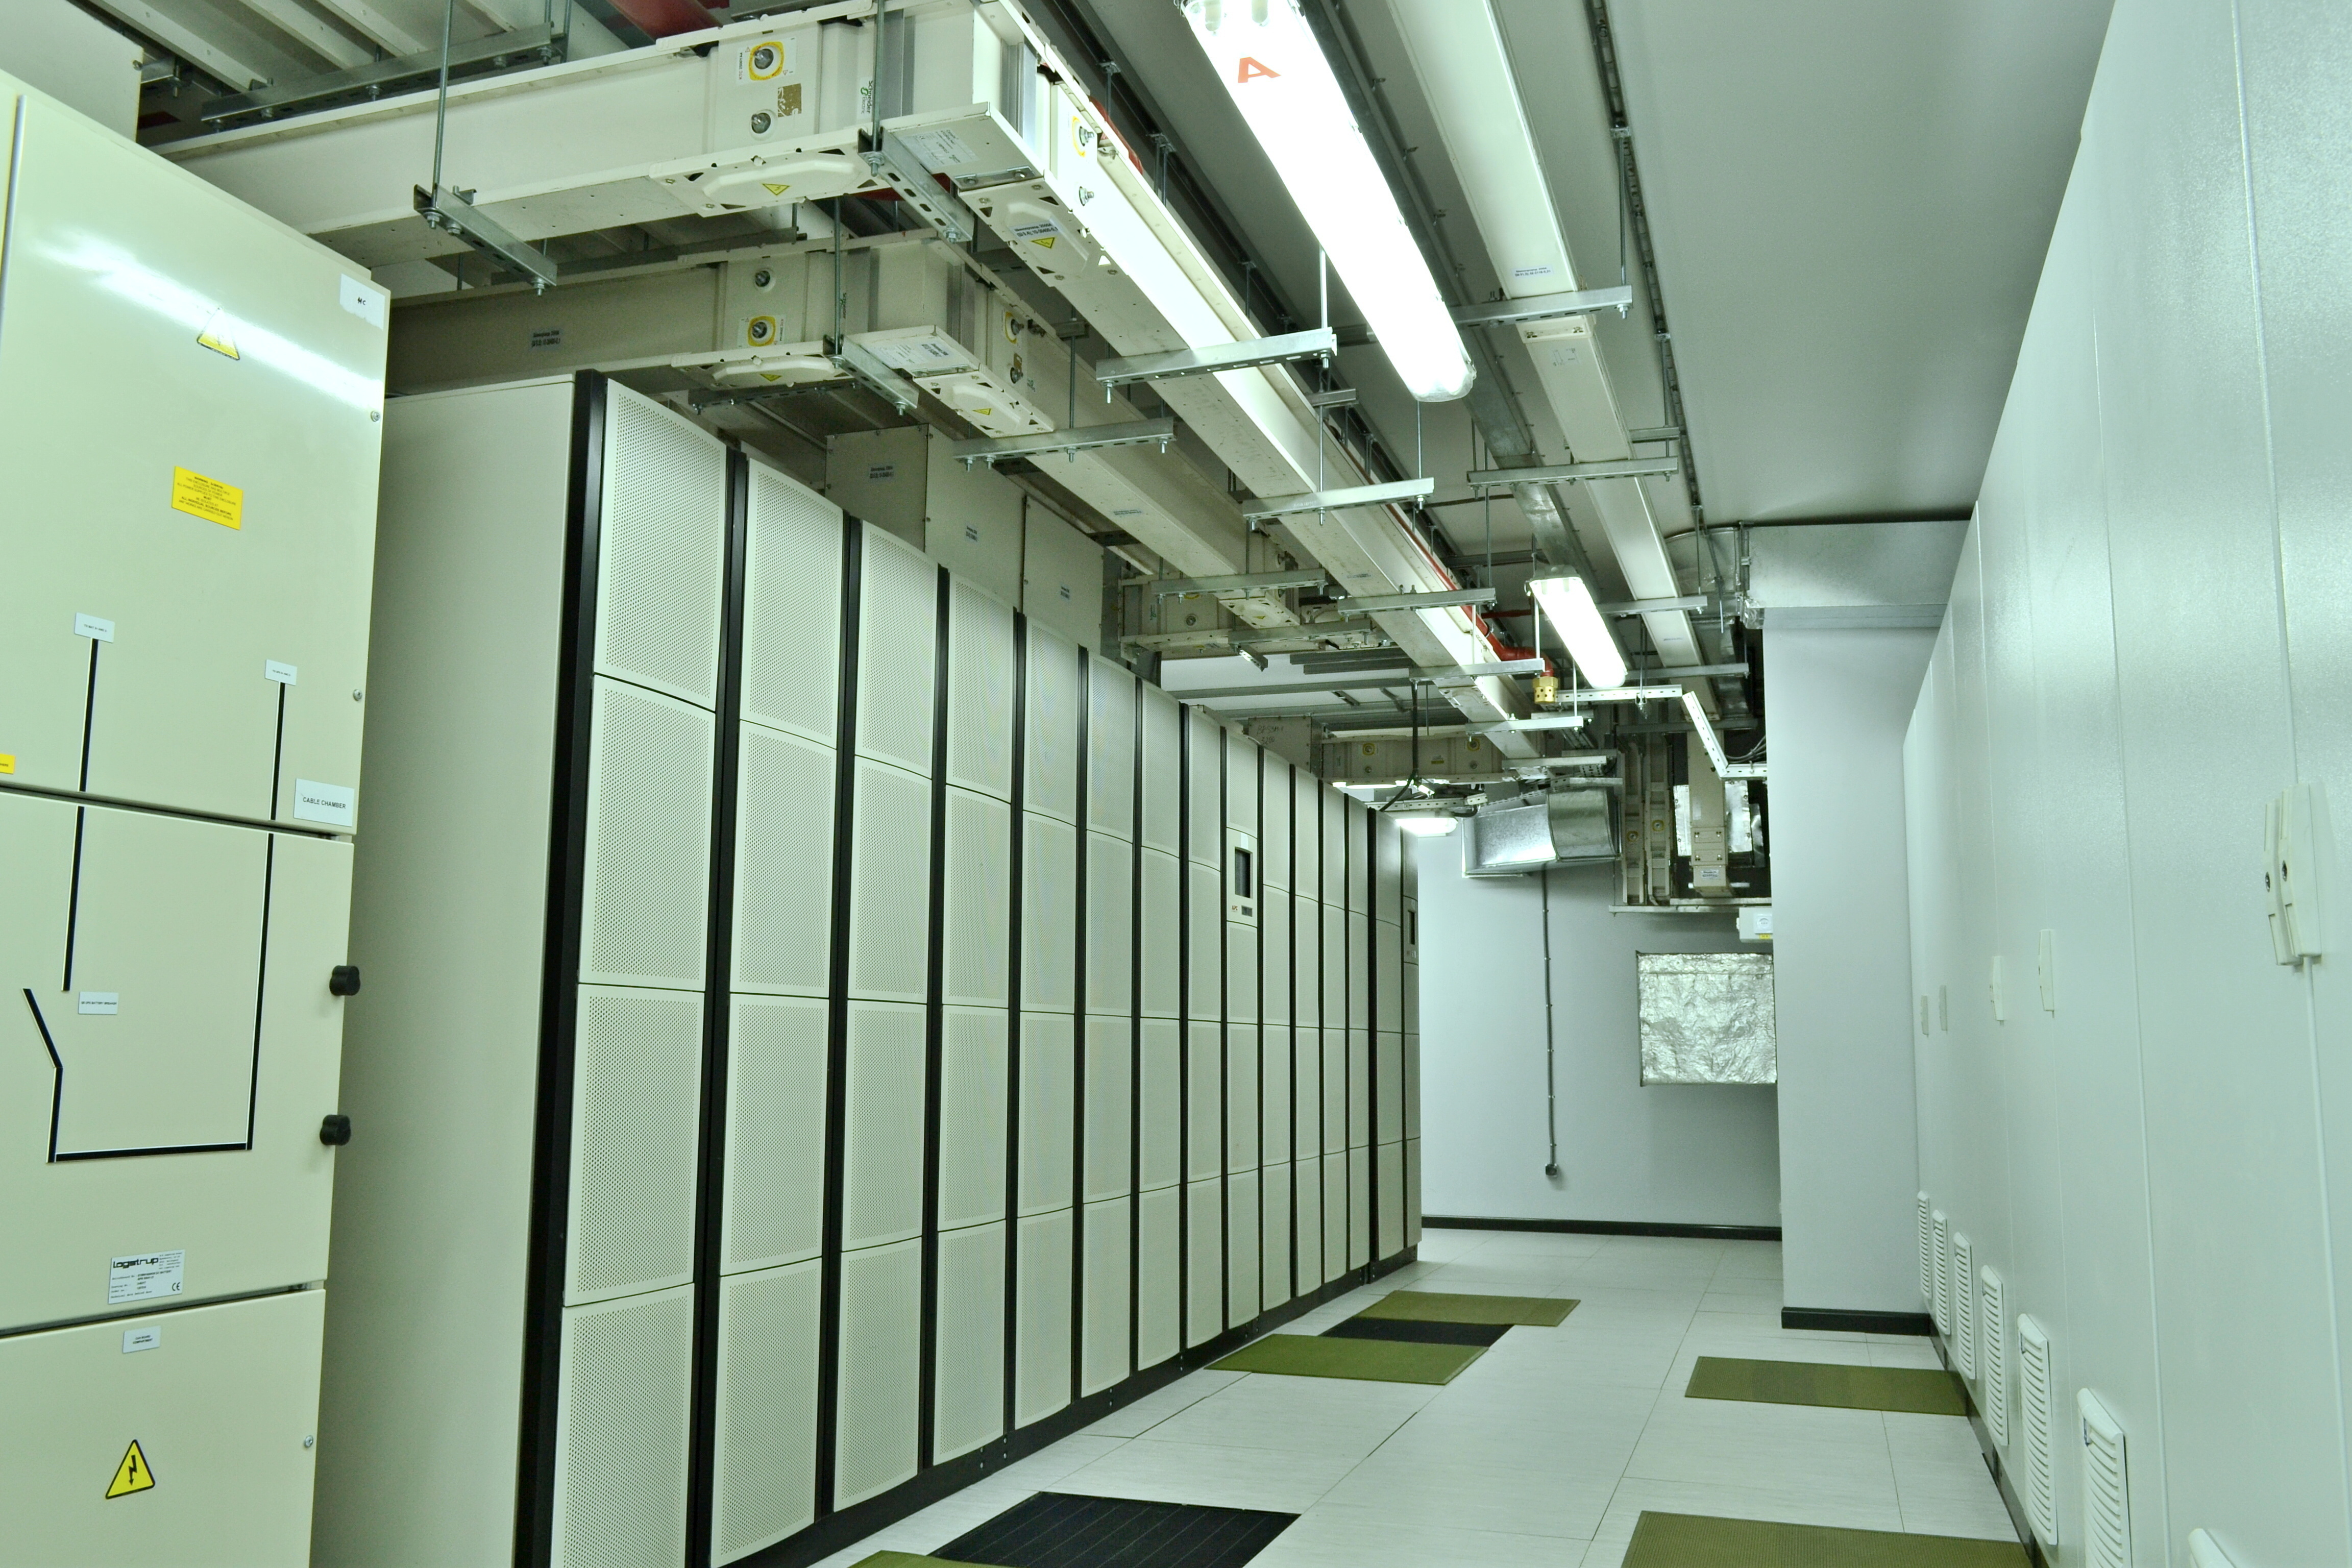 Data center electrical room with cooling air handler units (CRAHU)
